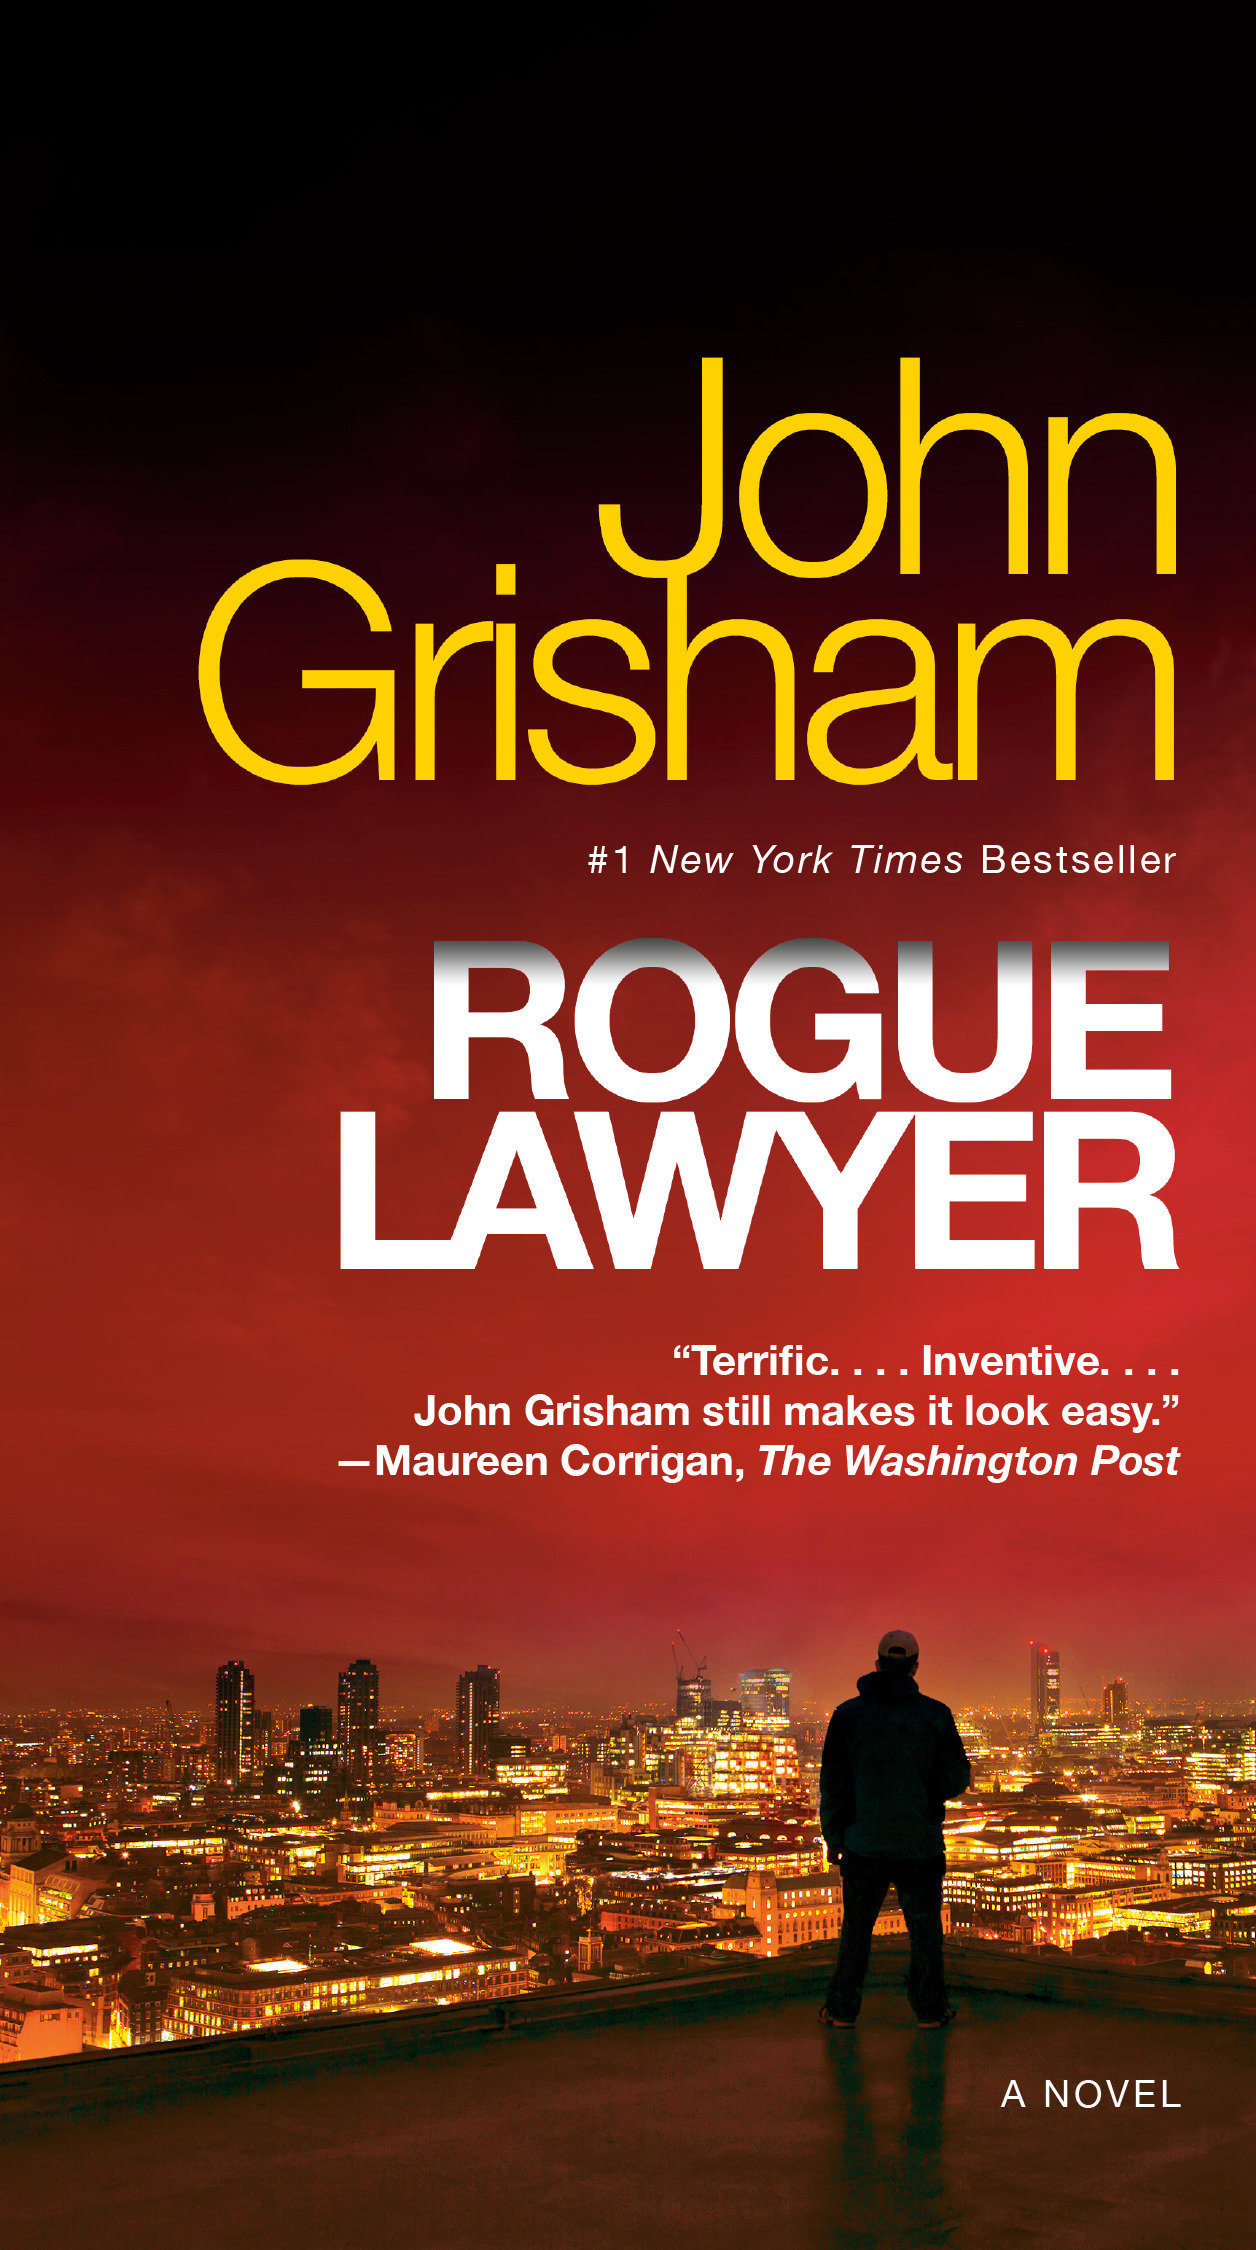 Rogue lawyer cover image